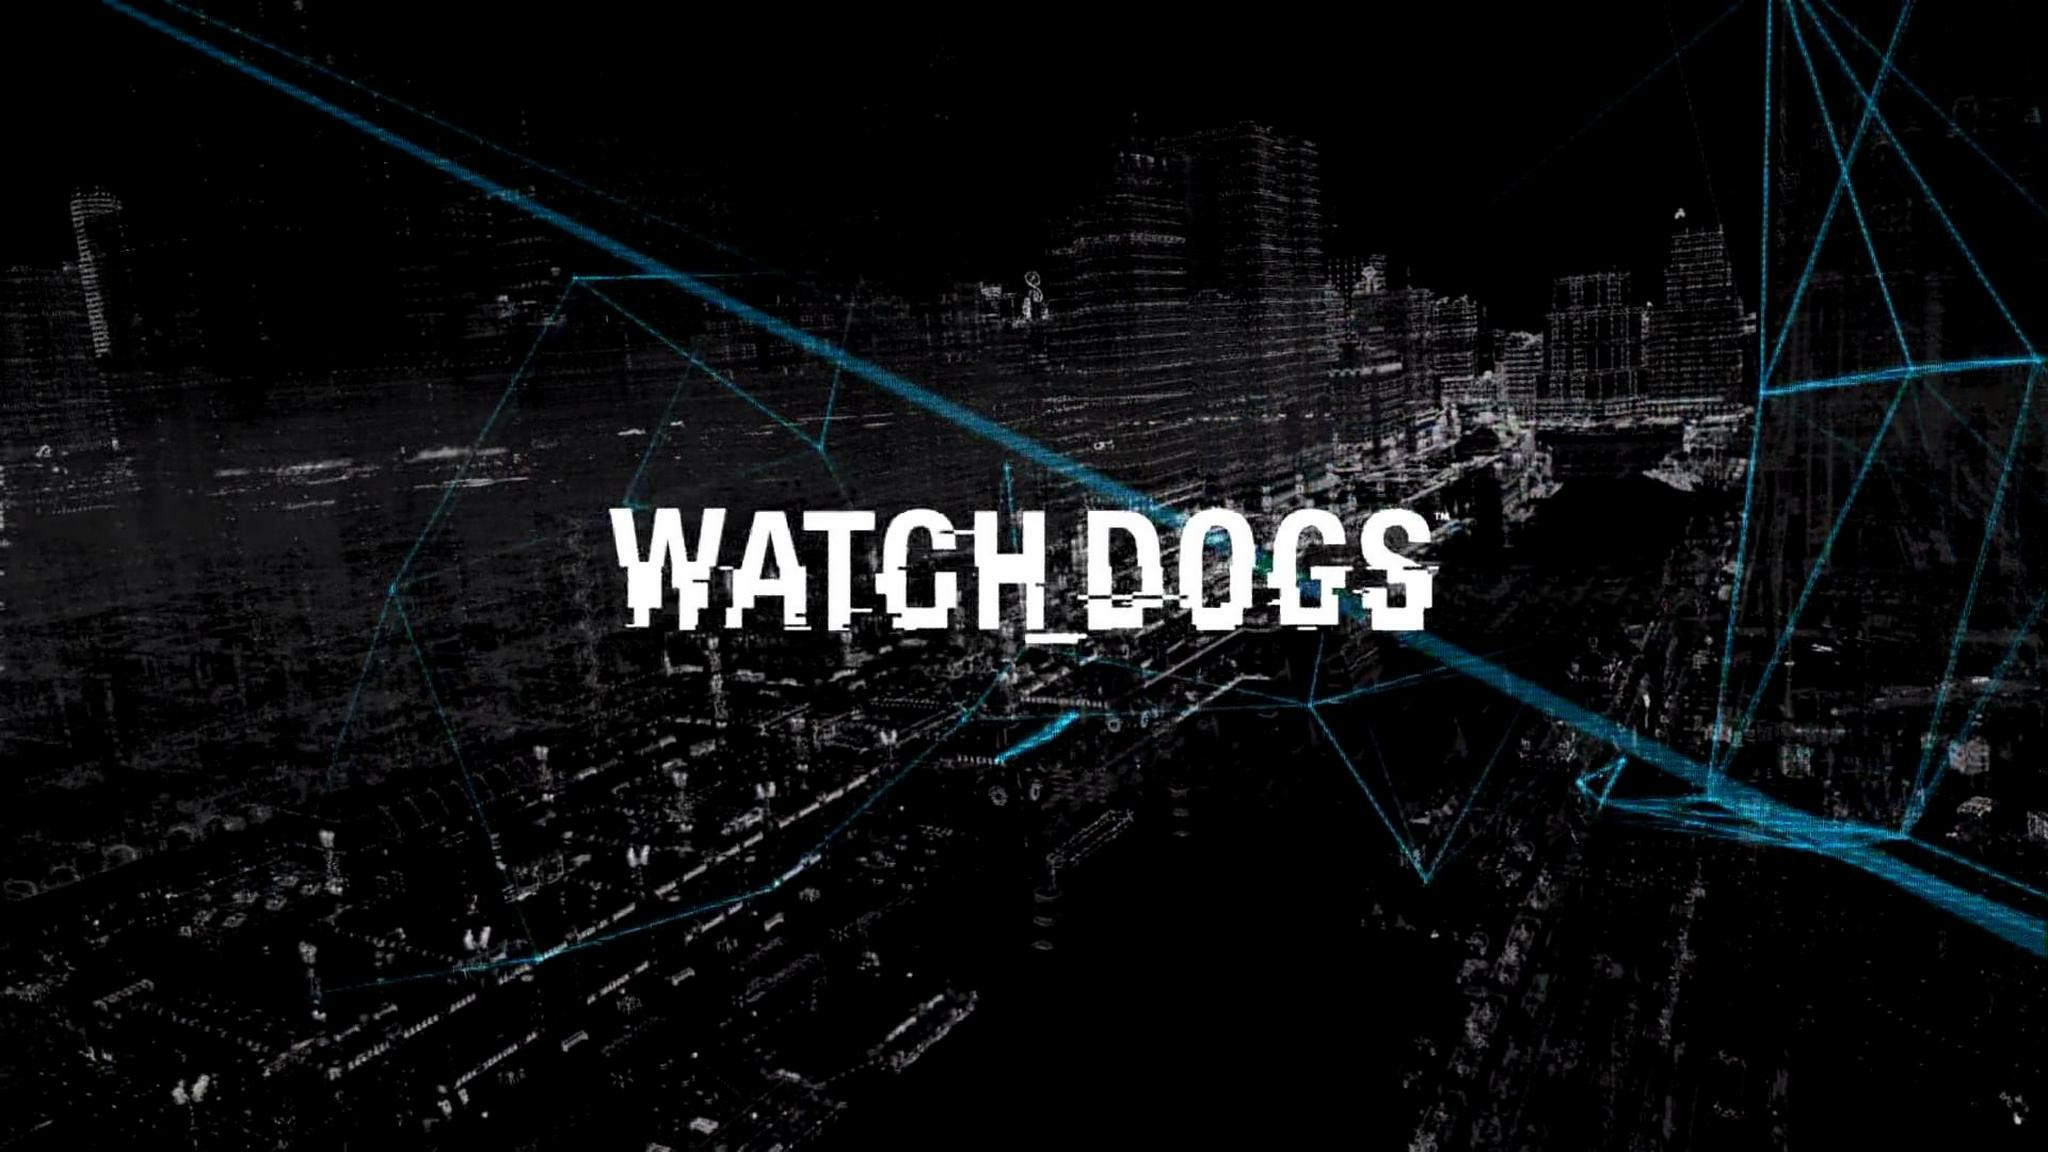 4k Loading Screens And Music Theme From The Game Watch Dogs Gta5